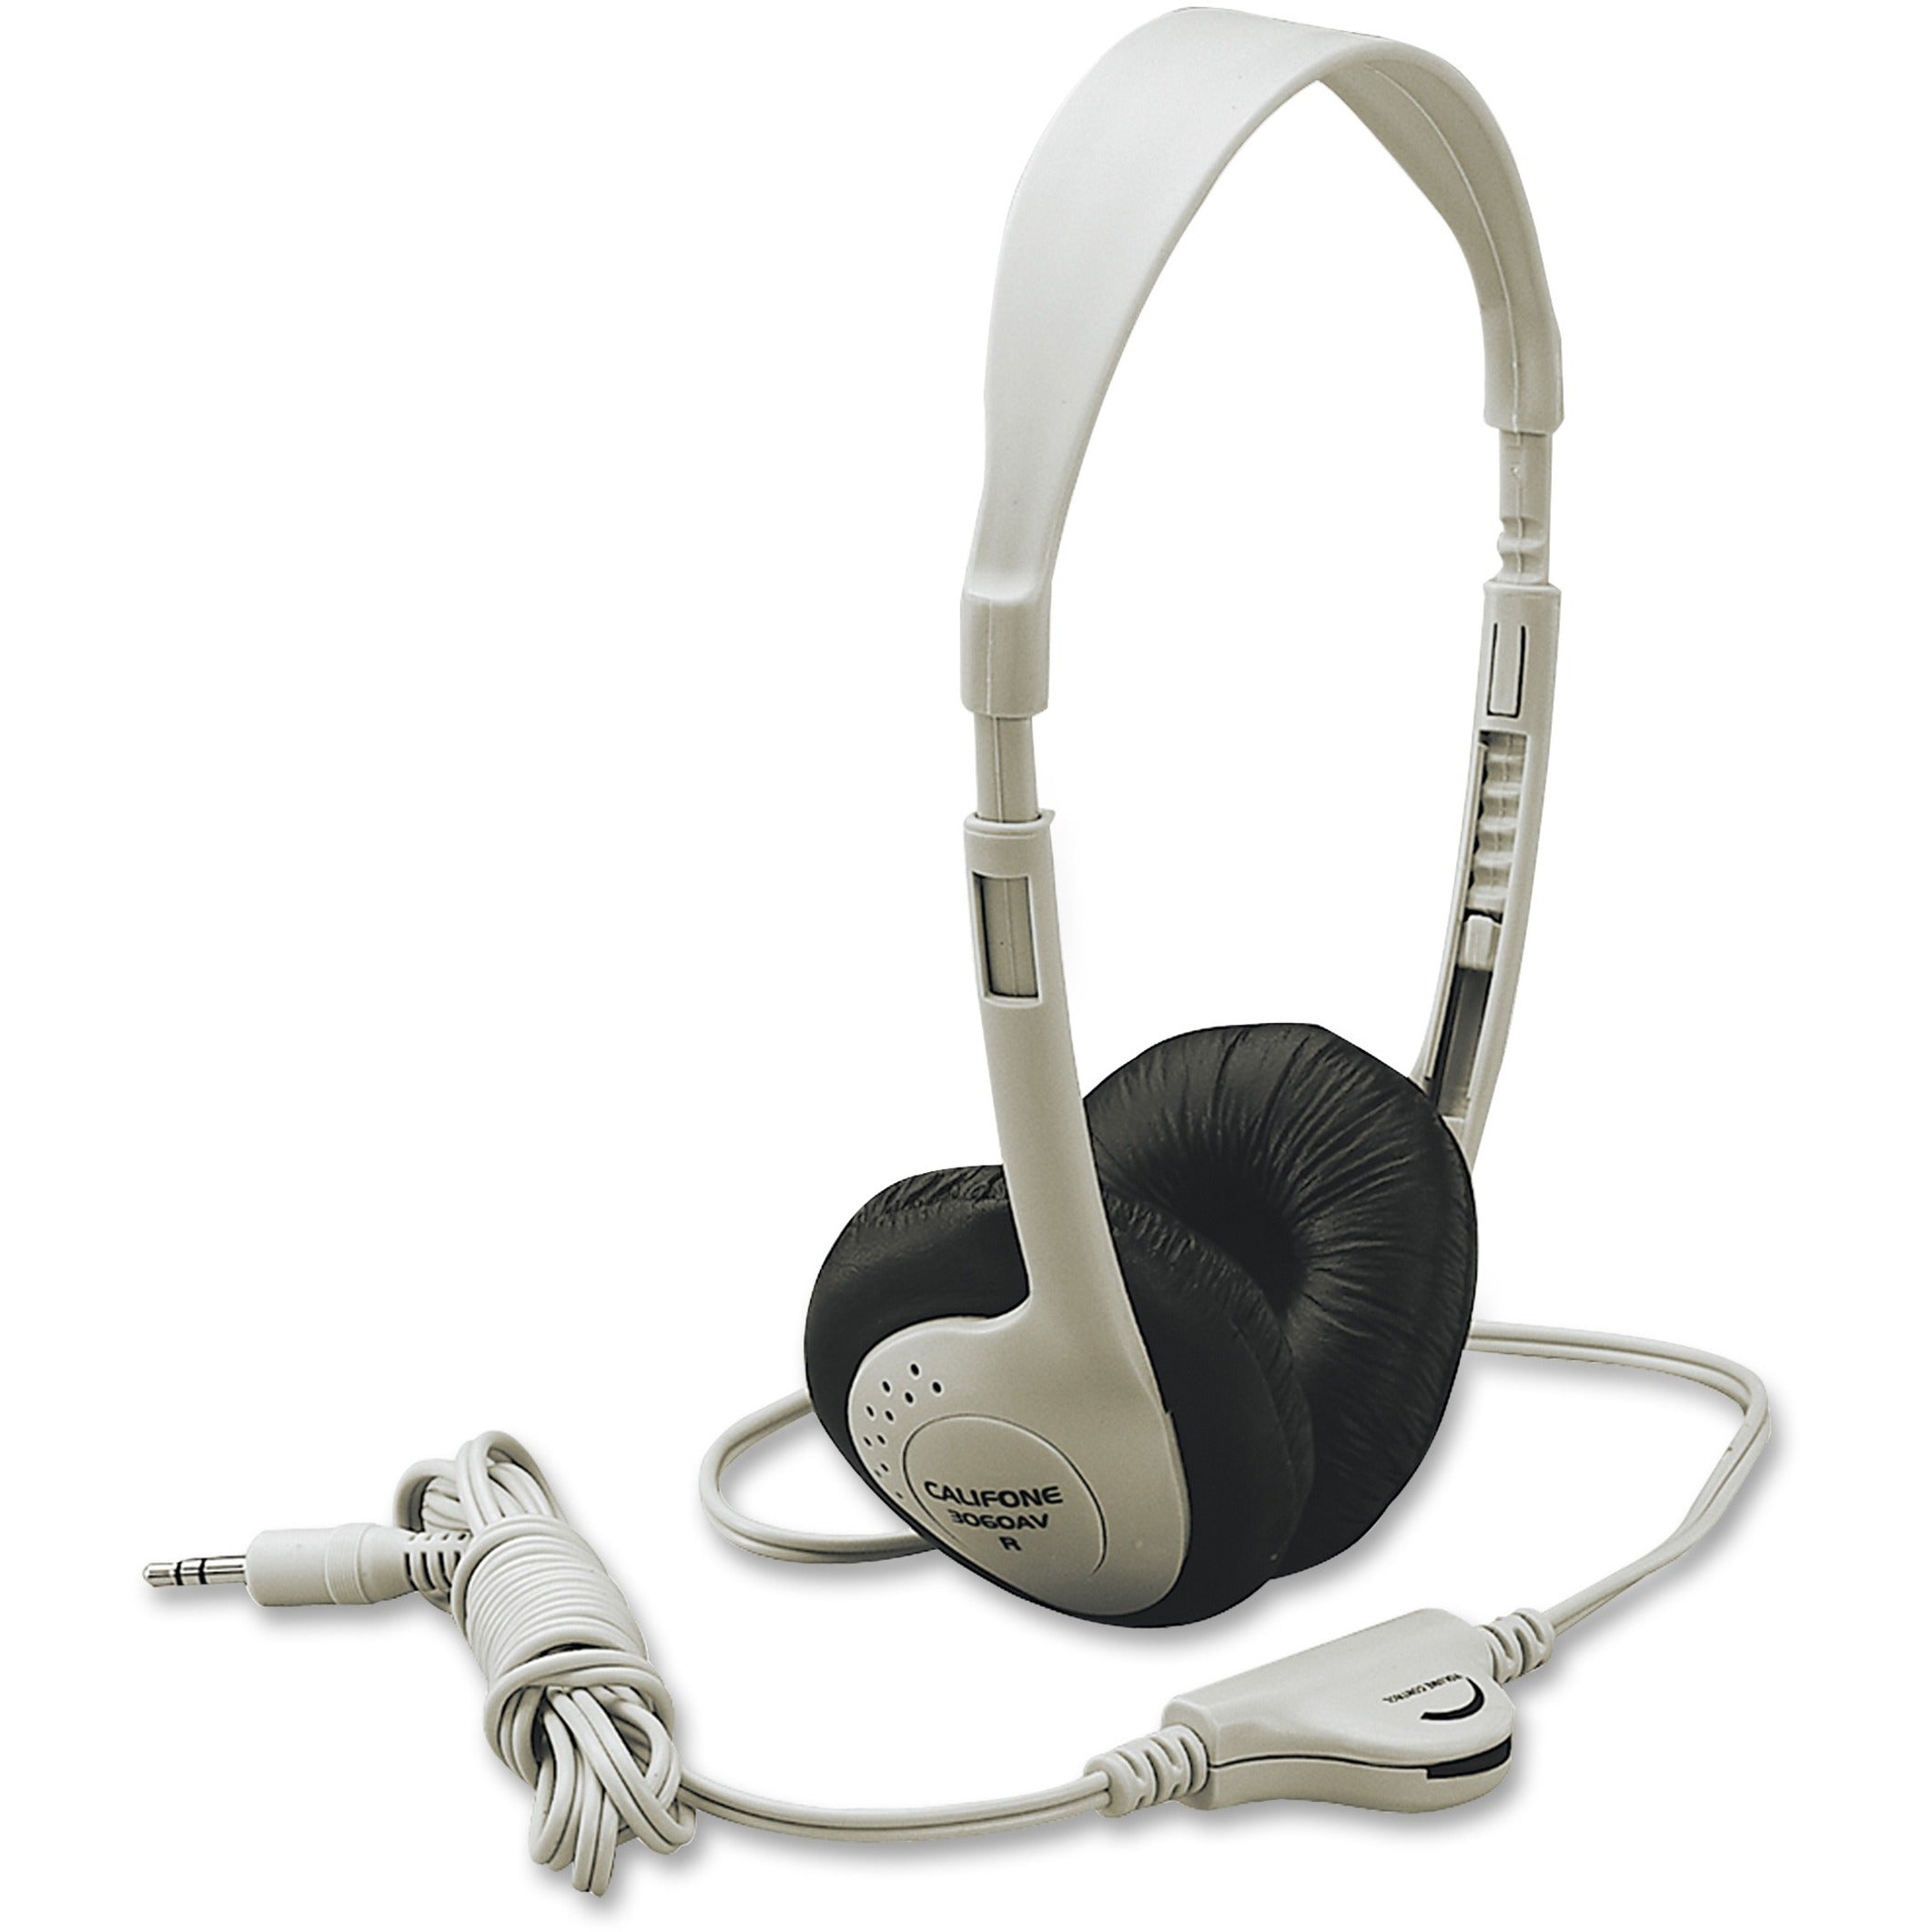 Califone 3060av Multimedia Stereo Headphone Wired Beige, Over-the-head Volume Control, 8 ft Cable Length